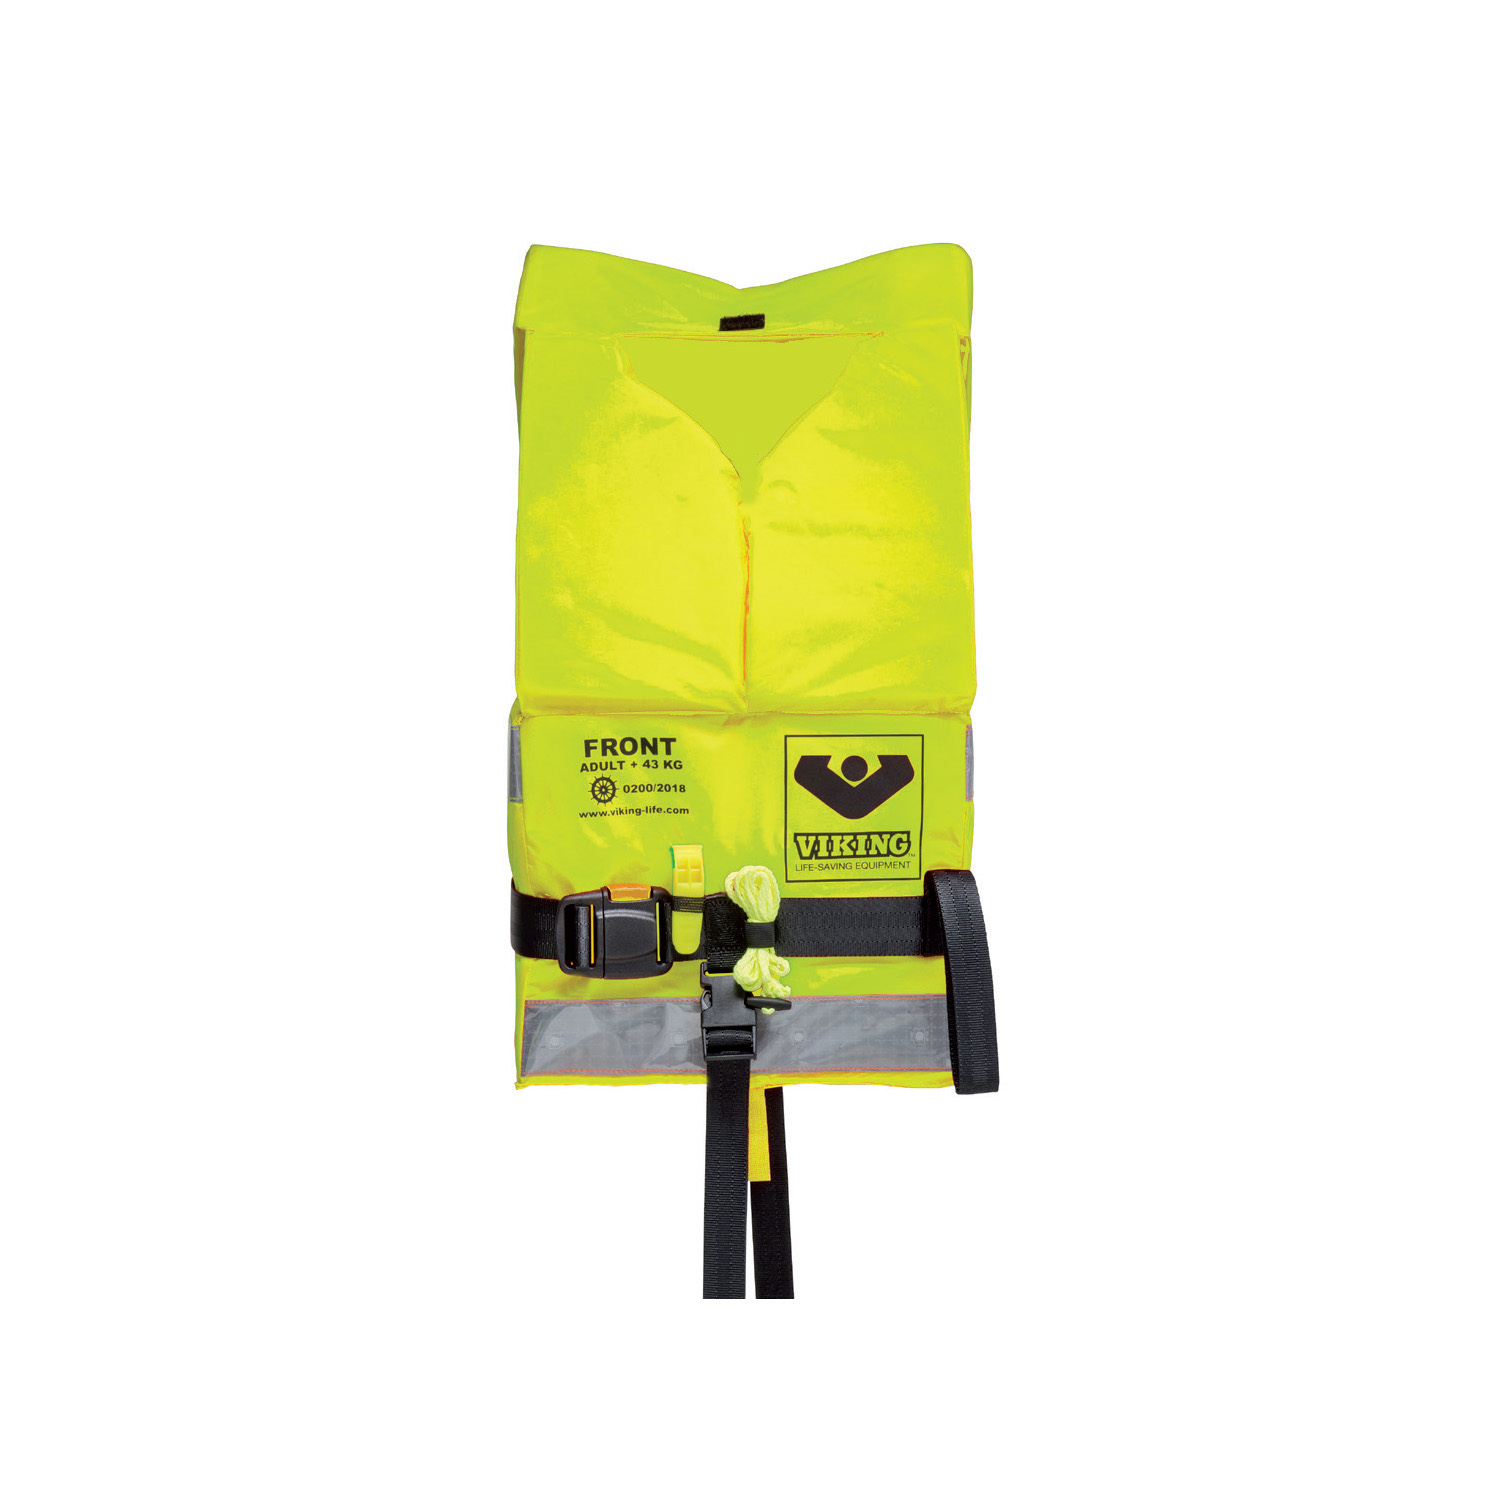 SG05014 Viking YouSafe™ Essence Lifejacket Designed to minimize storage dimensions, while still allowing for easy repacking for crew. Featuring a compact design and proven in-water performance, VIKING YouSafe™ Essence is a great basic lifejacket for commercial cargo and passenger vessels.